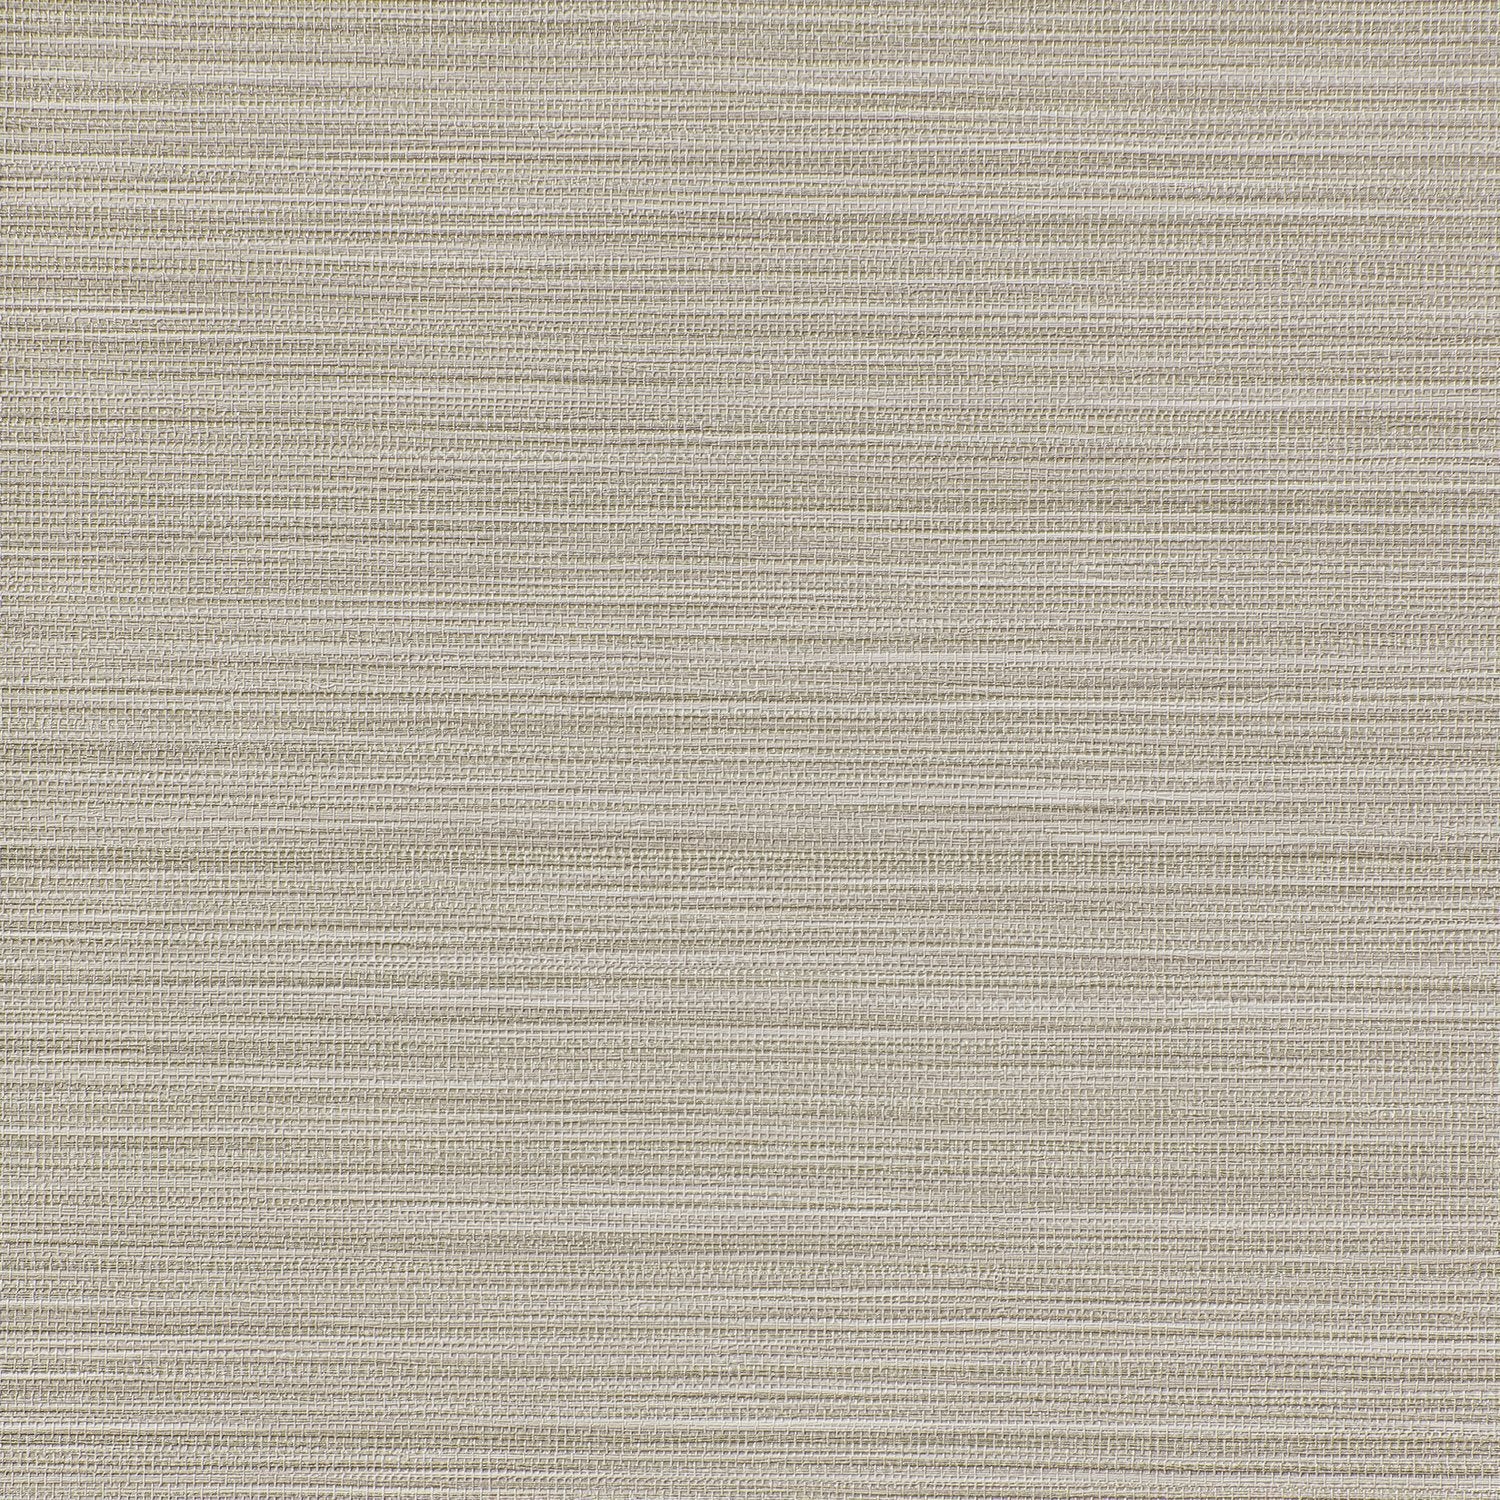 In Stitches - Y47804 - Wallcovering - Vycon - Kube Contract